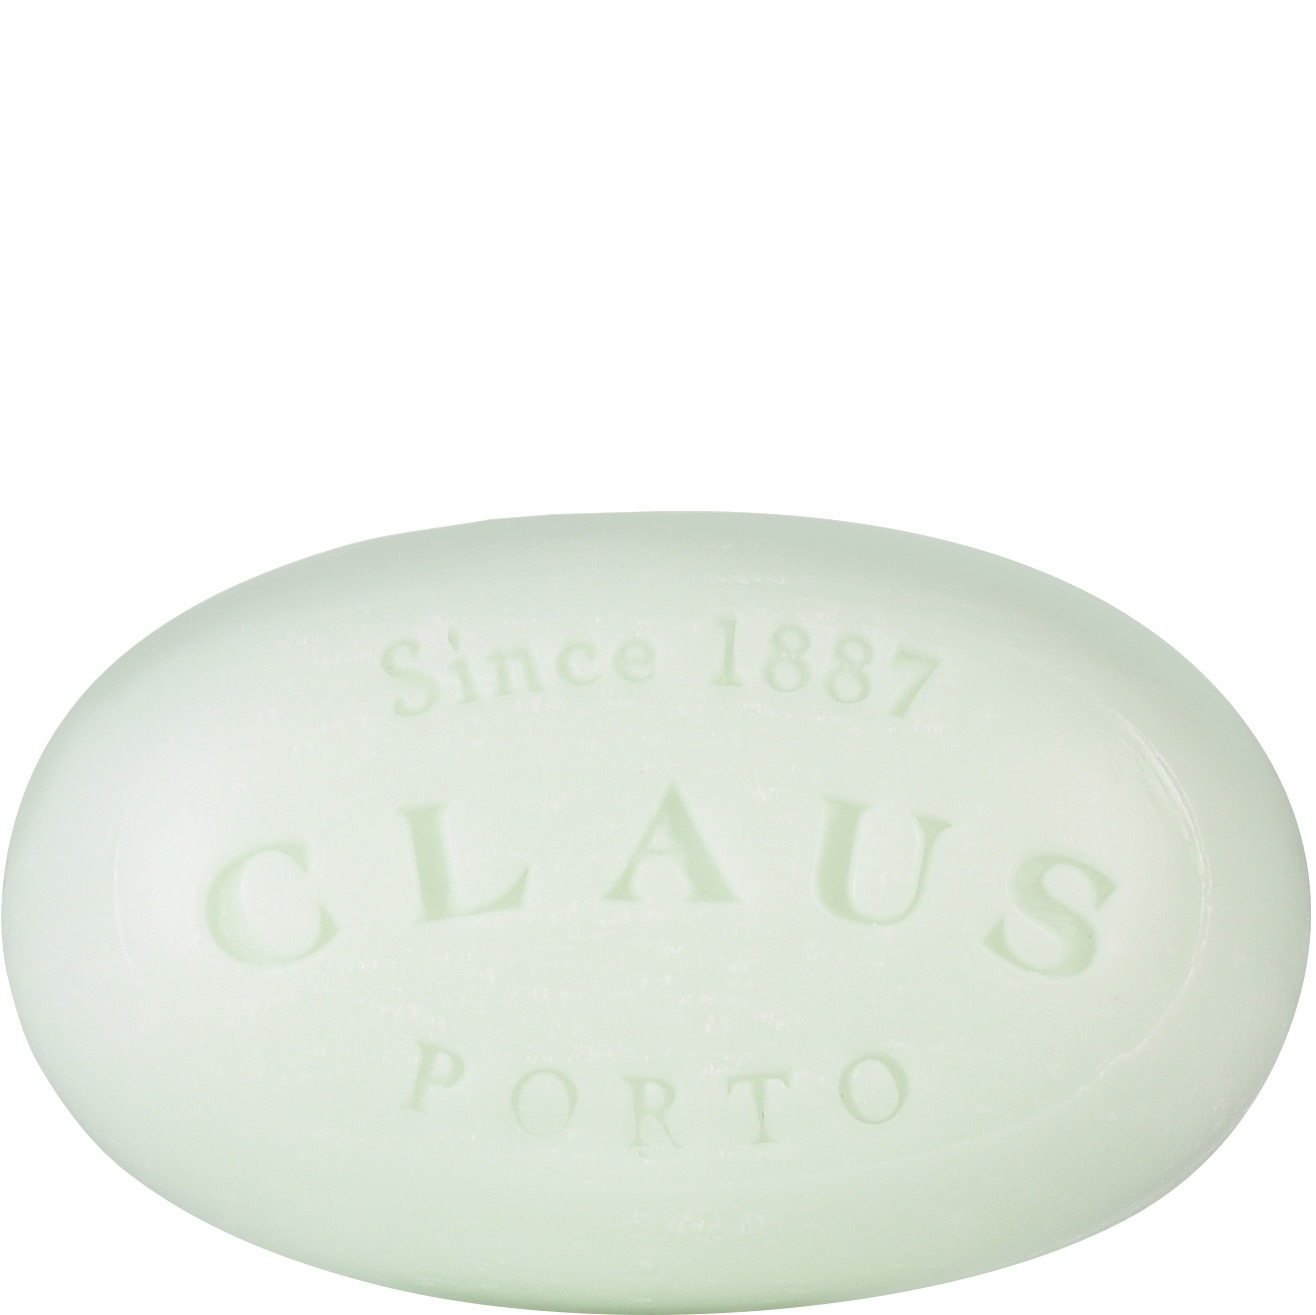 Claus Porto Mini Soap Madrigal Water Lily 50g - 1.2 - CP-MS119